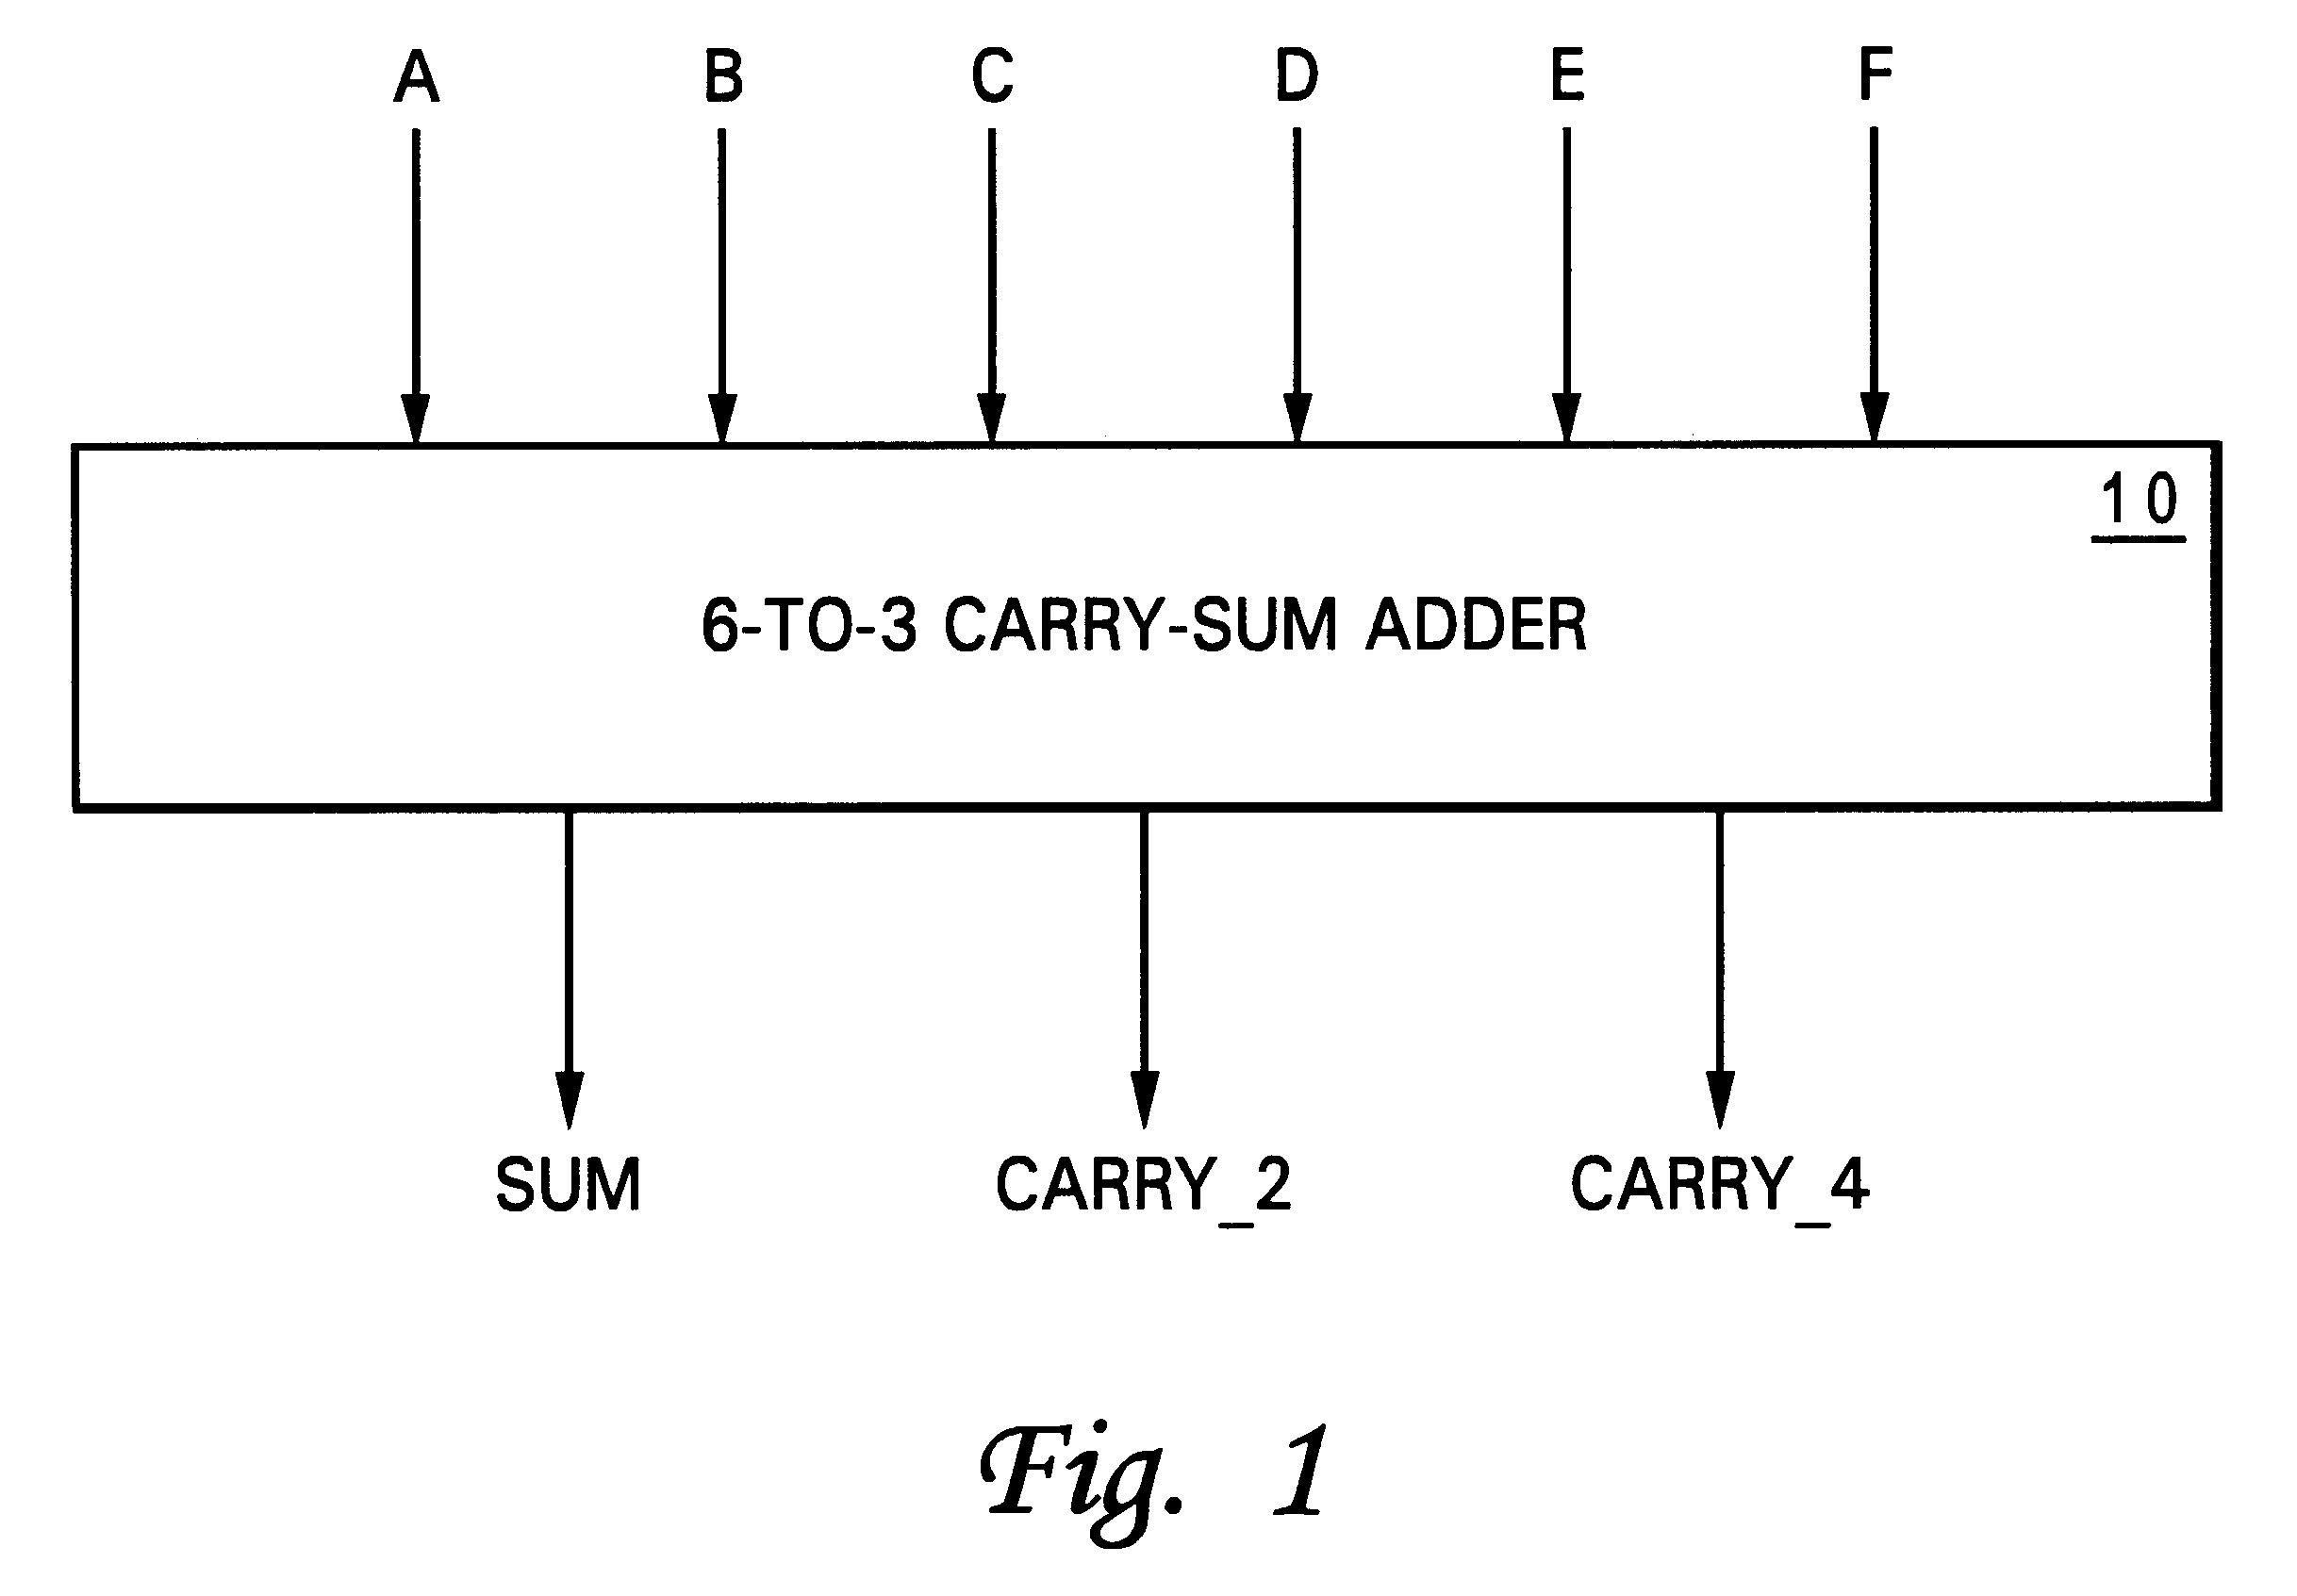 A 6-to-3 carry-save adder